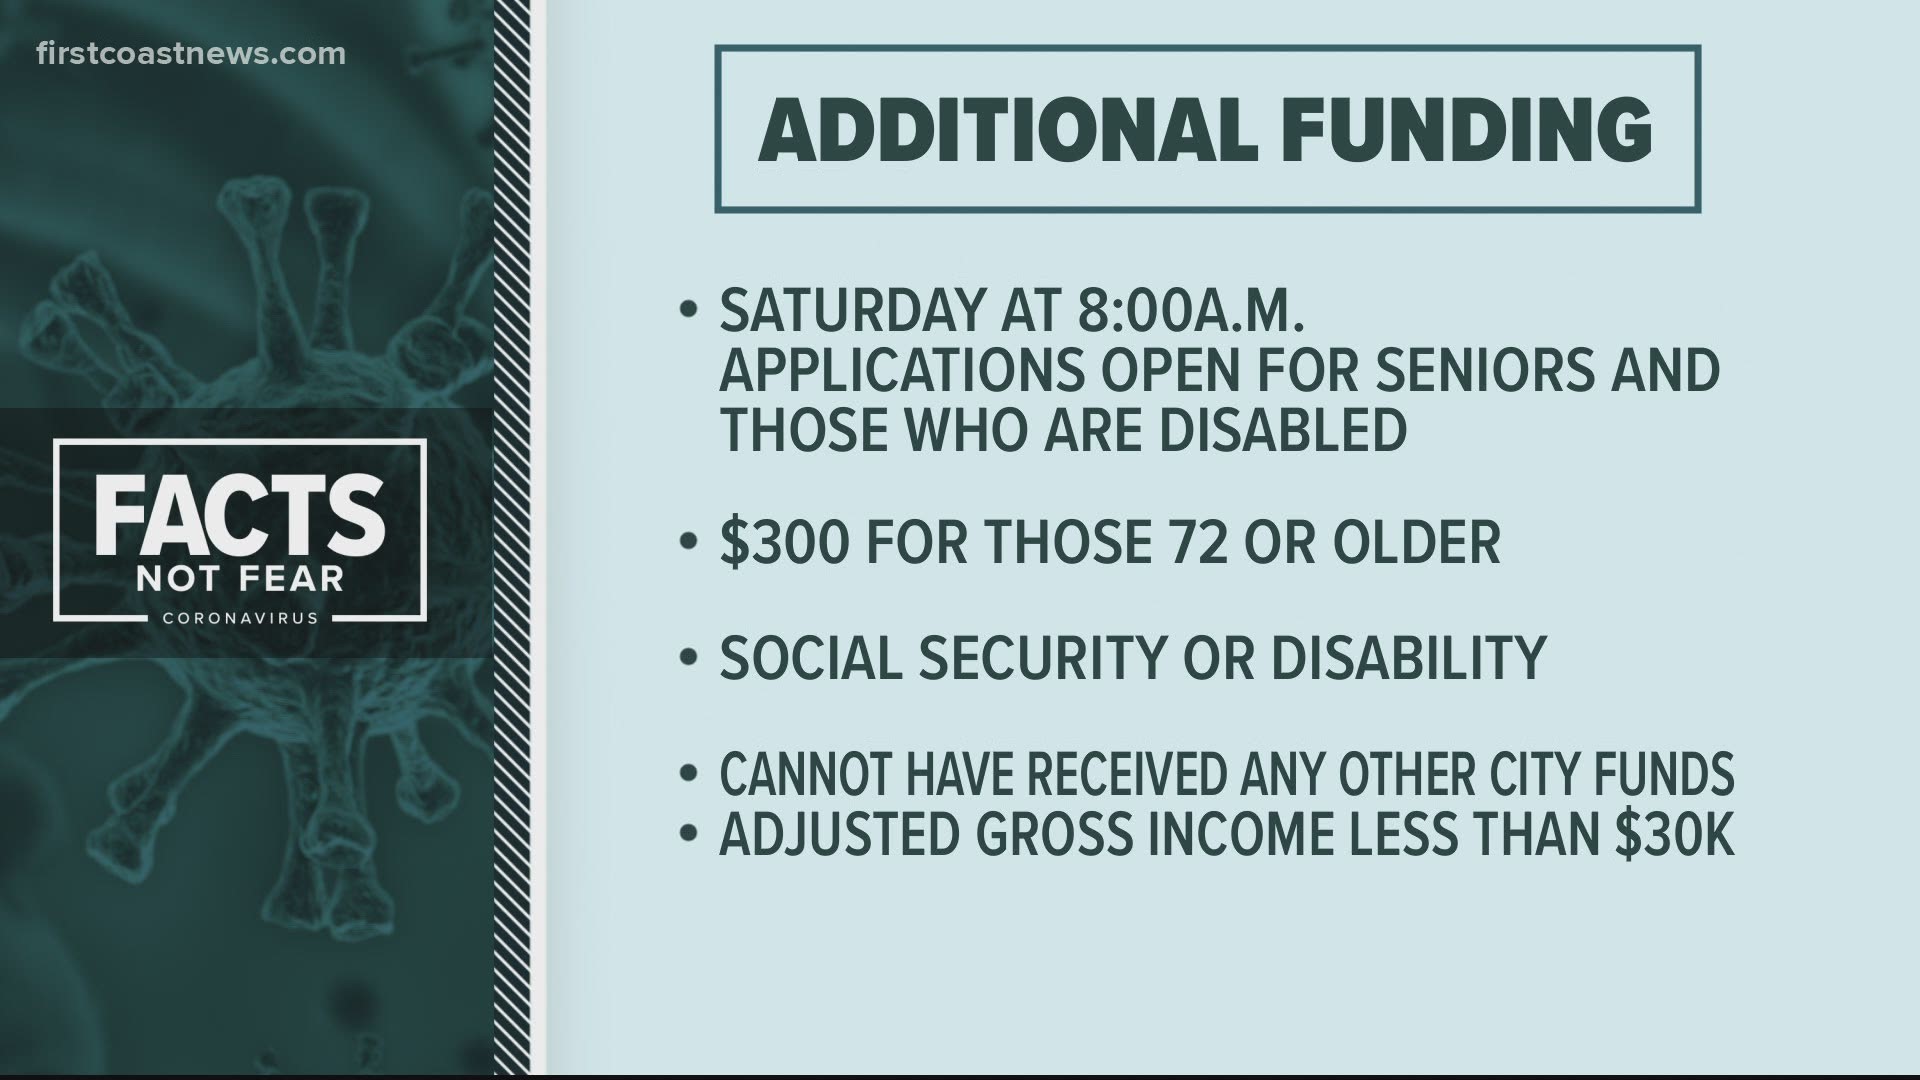 Financial assistance will be given to seniors and those who are receiving social security disability benefits who experienced a reduction in income due to COVID-19.